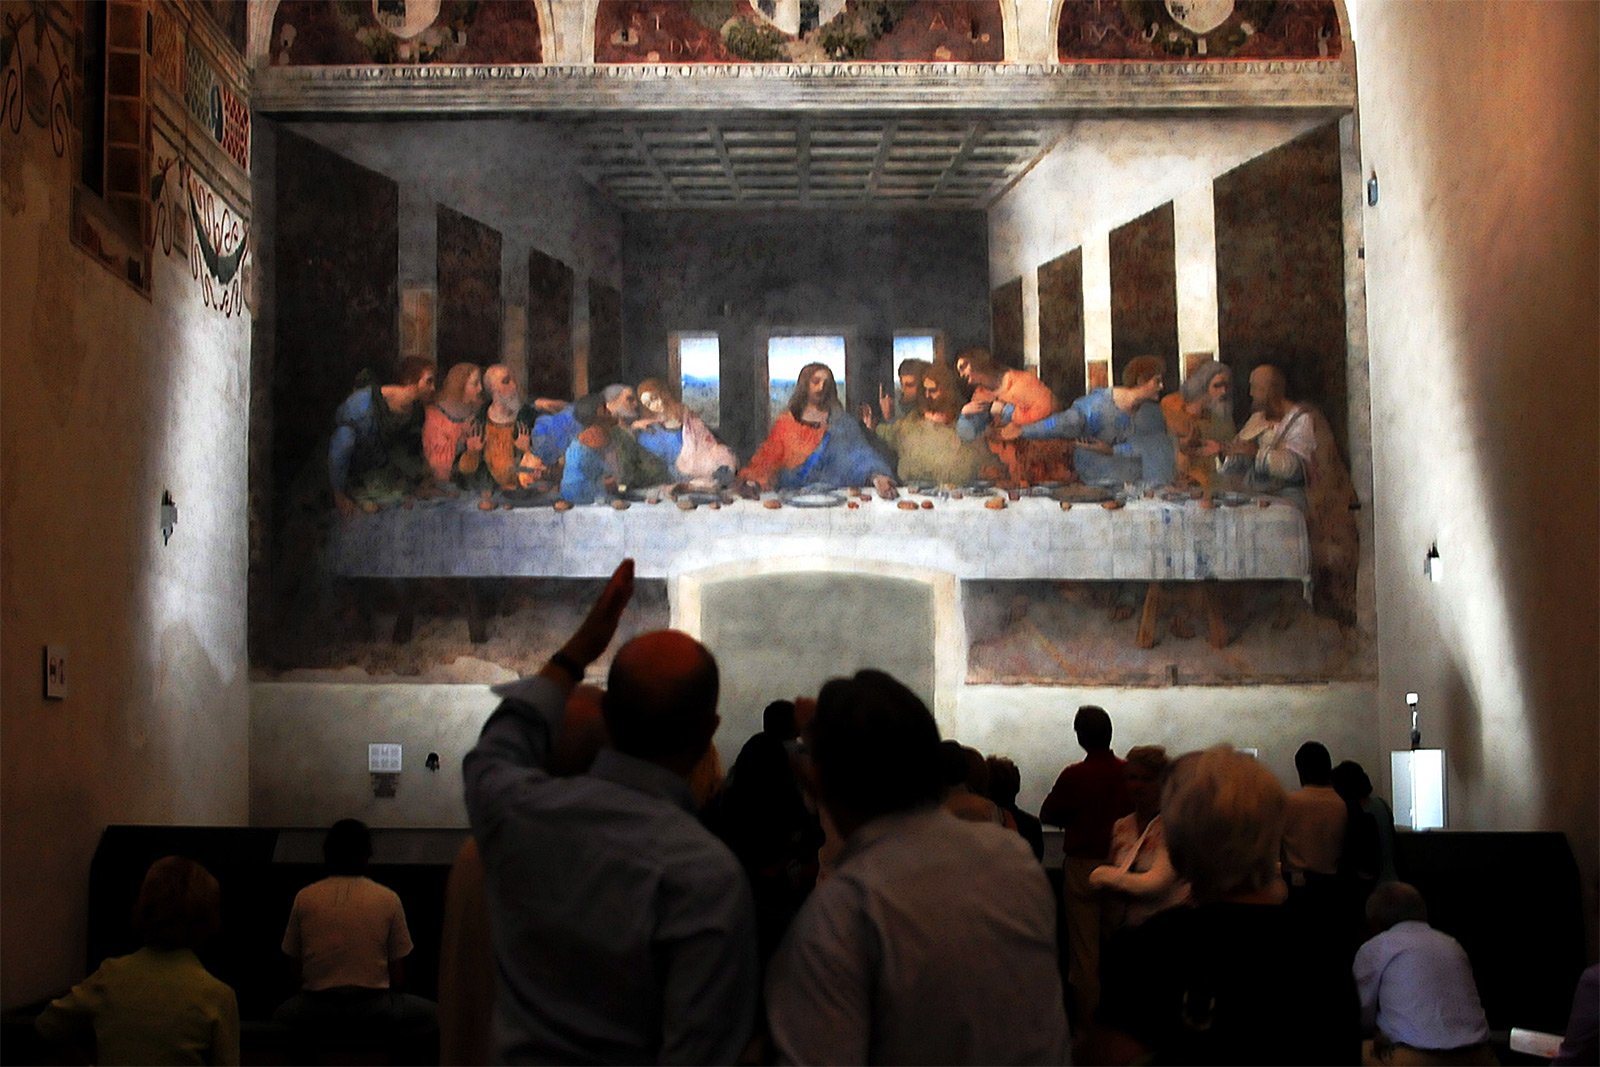 How to see the famous fresco by Leonardo da Vinci "Last Supper" in Milan